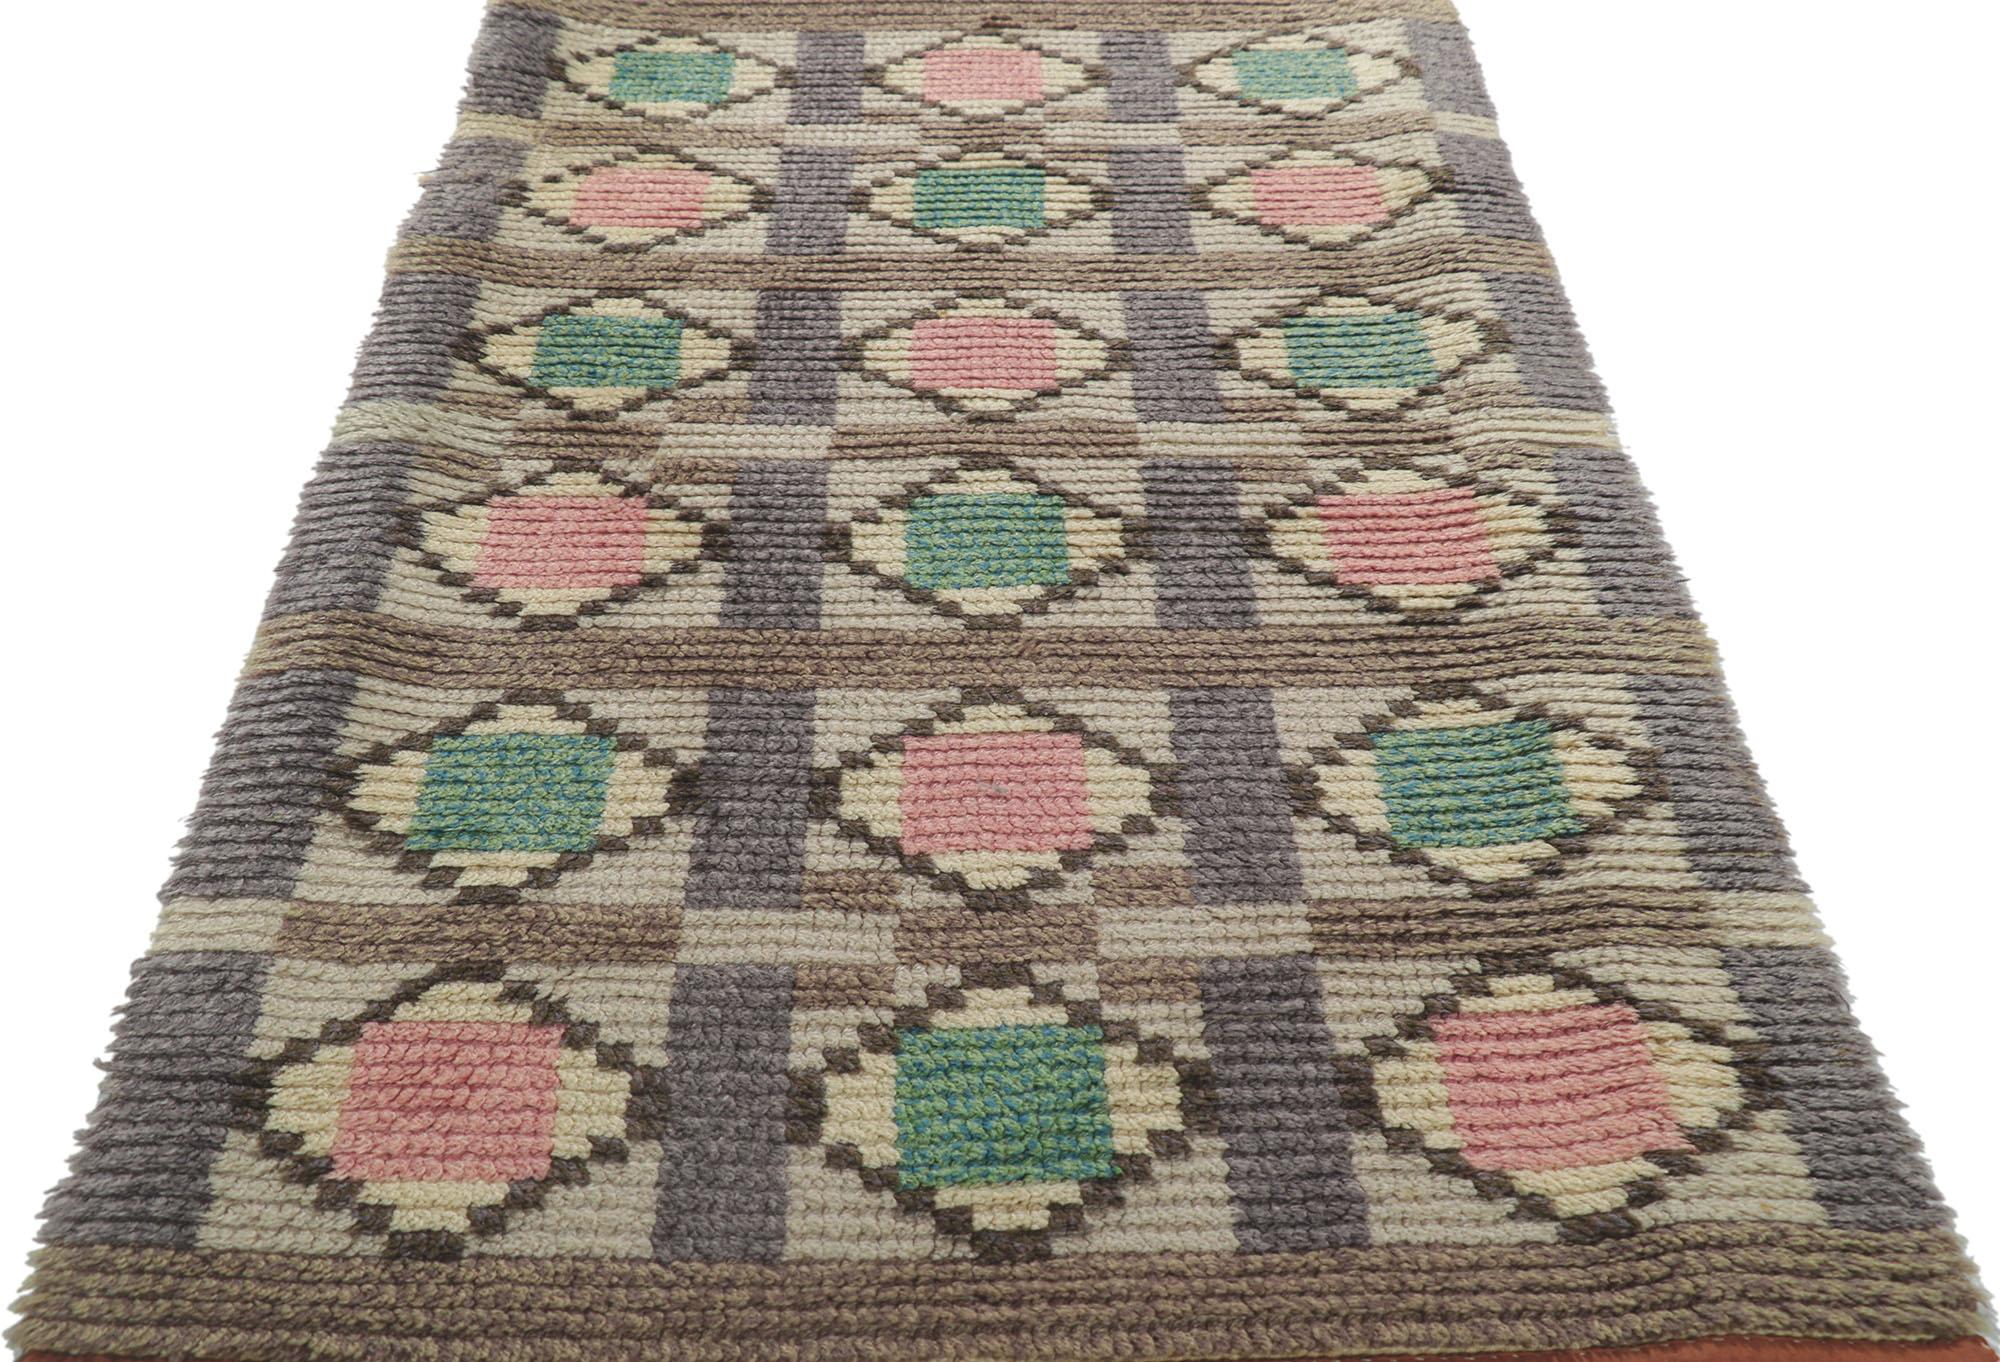 Vintage Finnish Ryijy Rya Rug with Scandinavian Modern Style In Good Condition For Sale In Dallas, TX